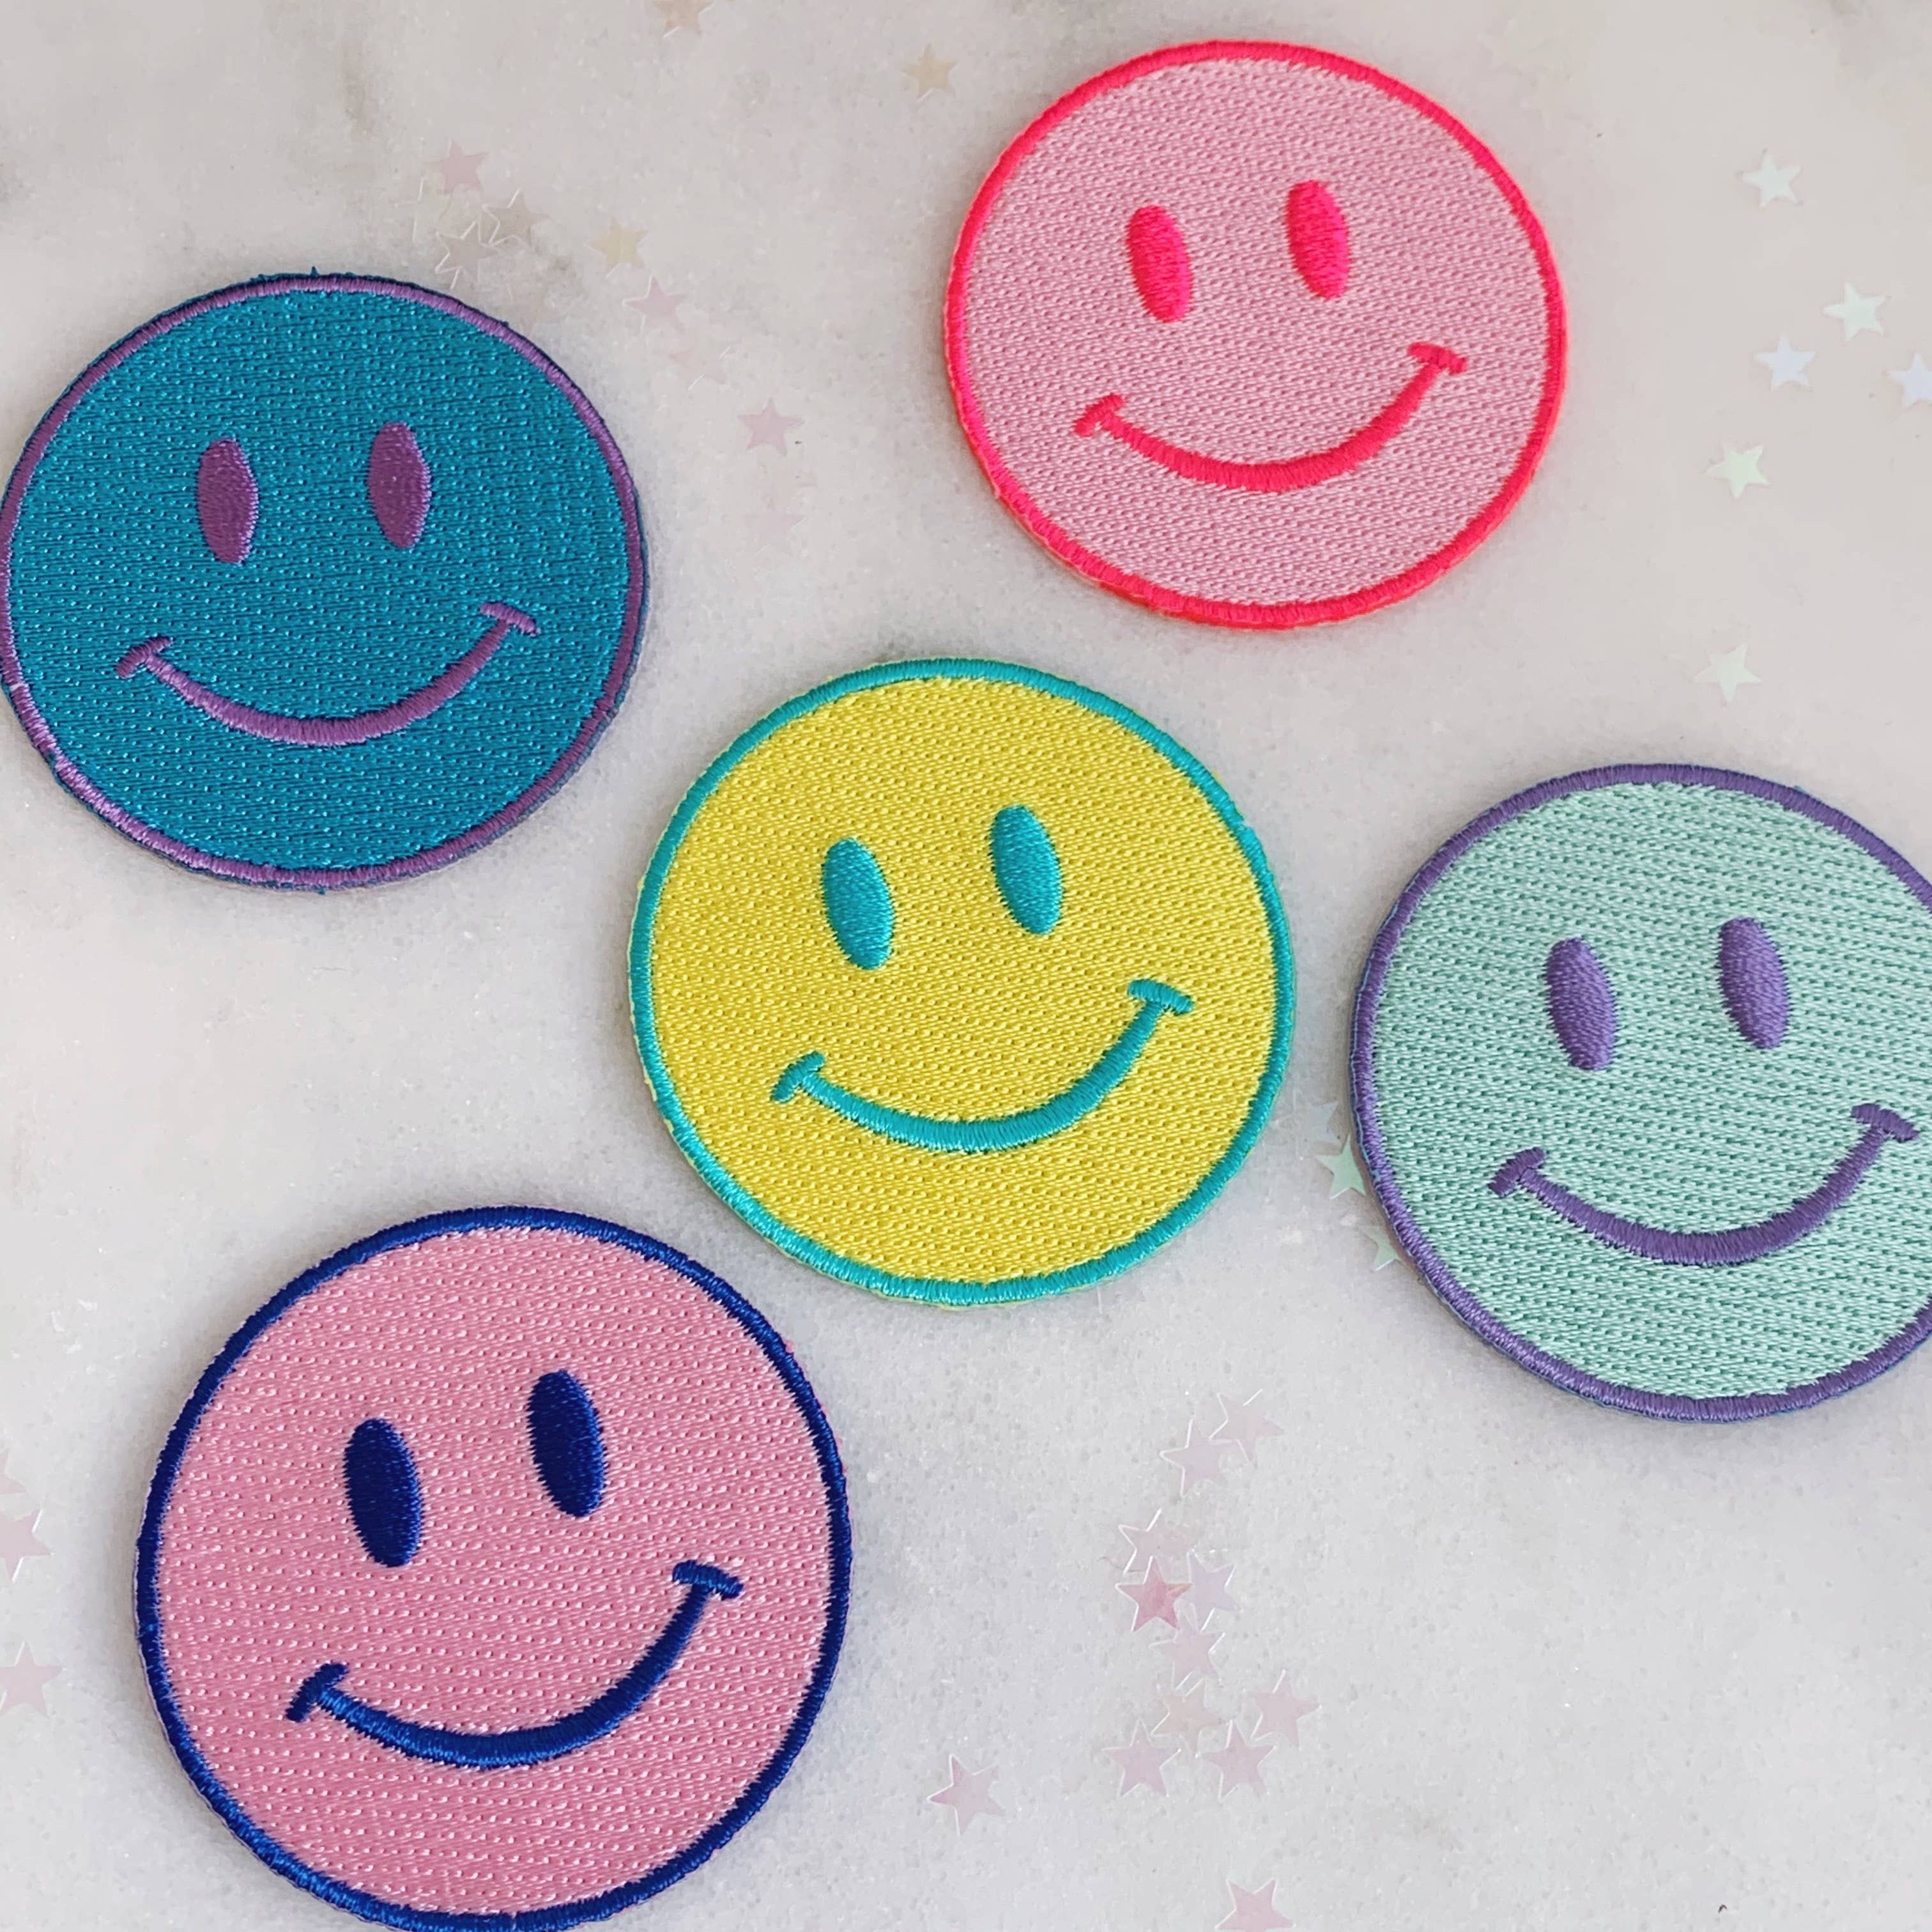 Smiley Face Patch - Pink-Hot Pink, Yellow, Blue, Pink-Blue